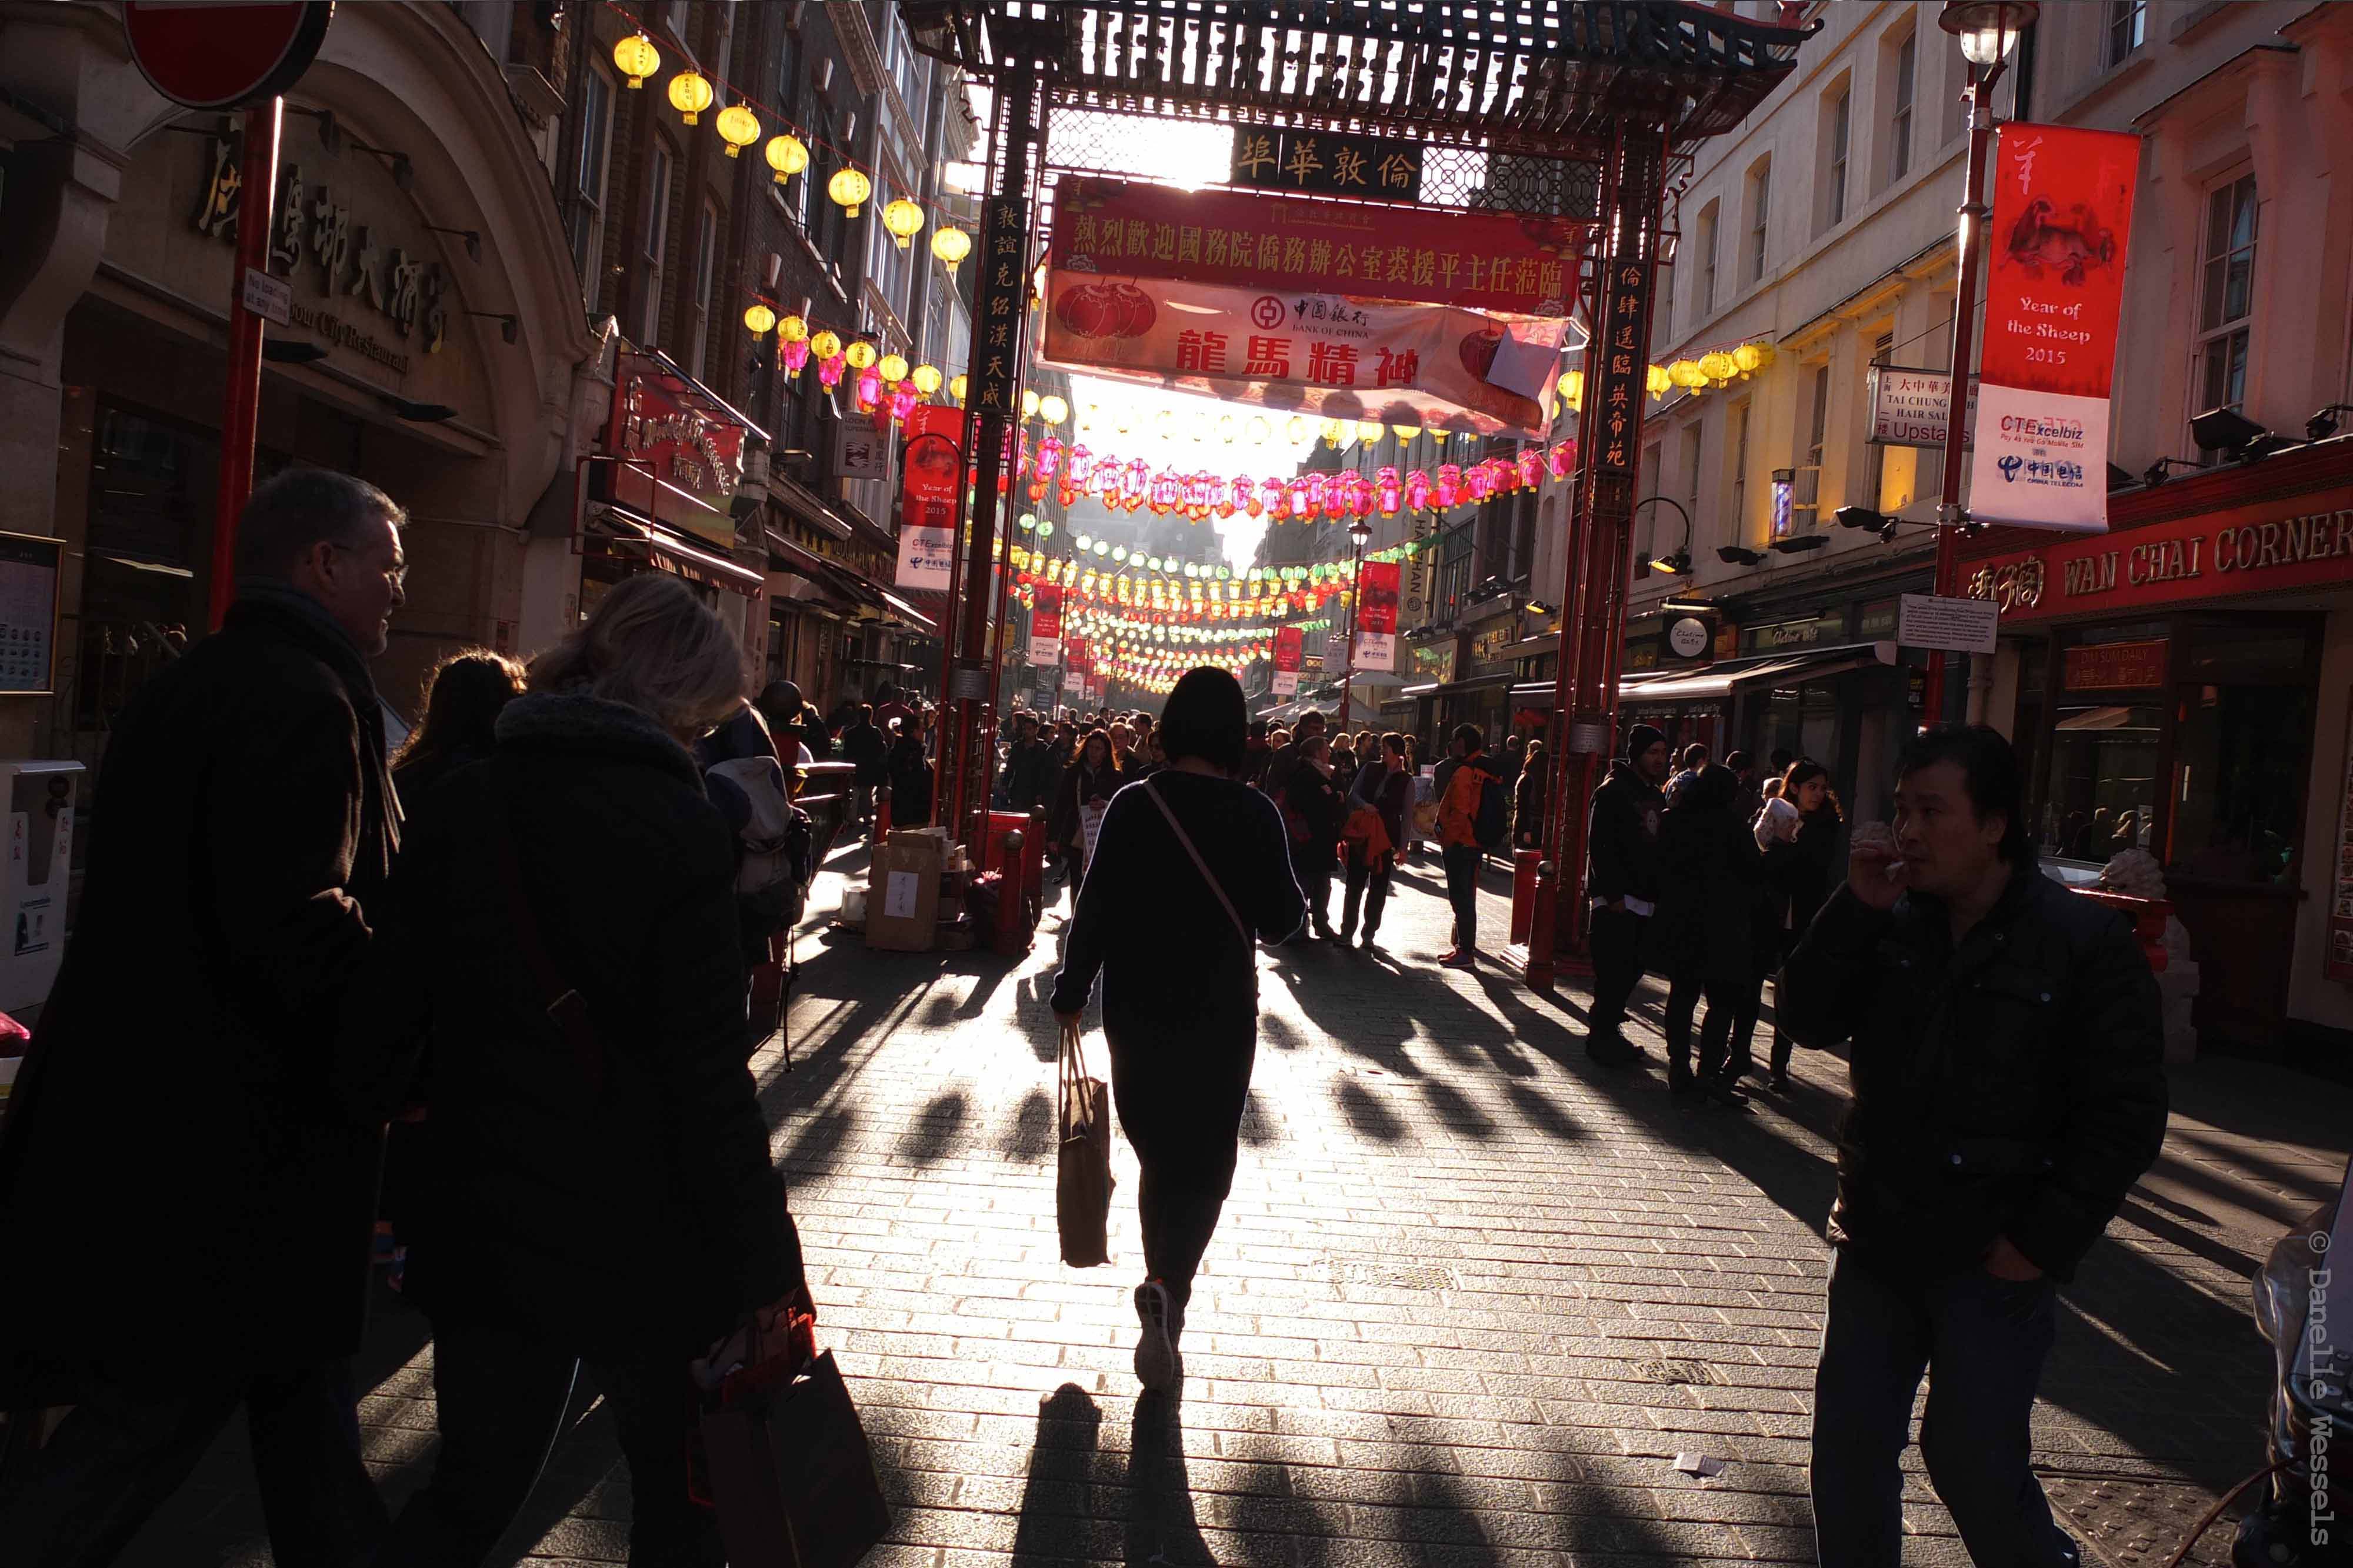 Shadows in China Town